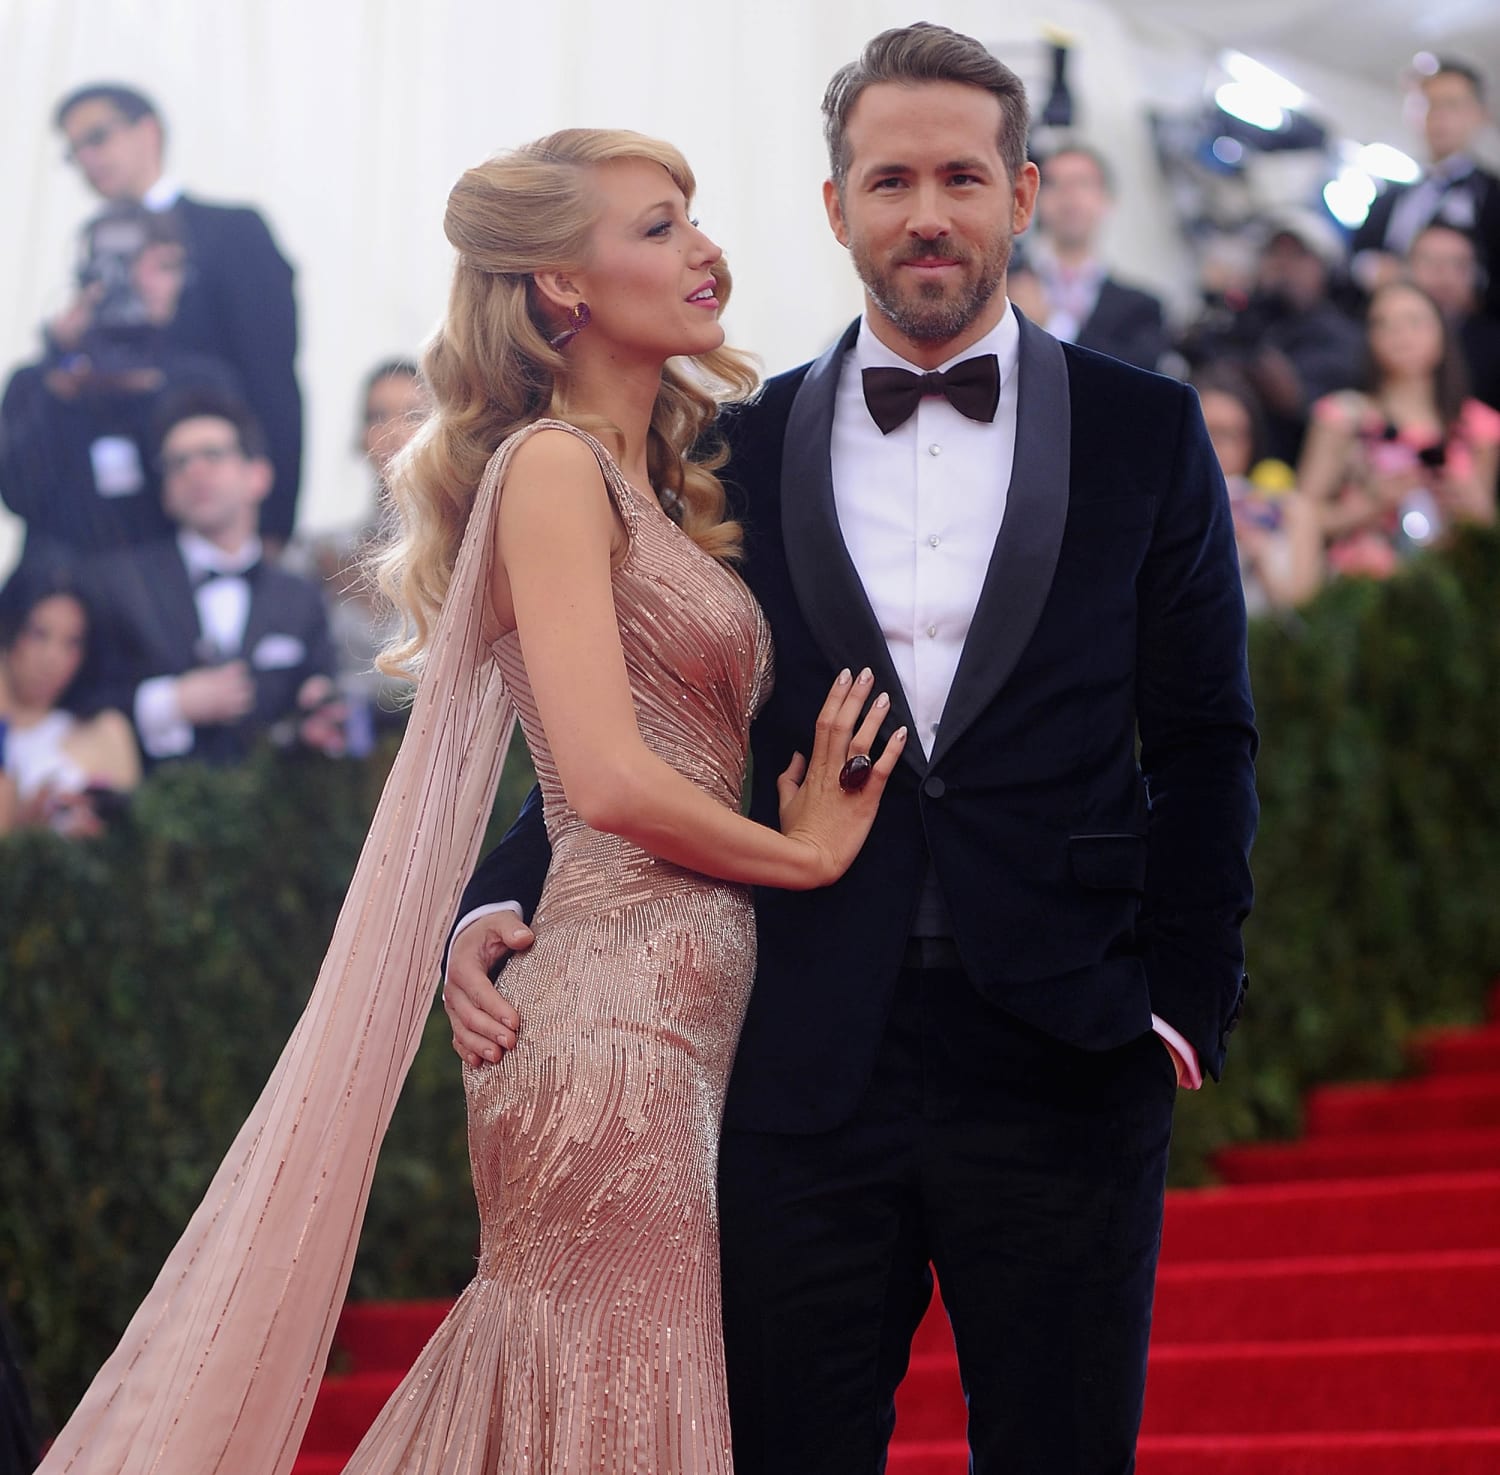 Blake Lively Shares The Rule She and Ryan Reynolds Made When They